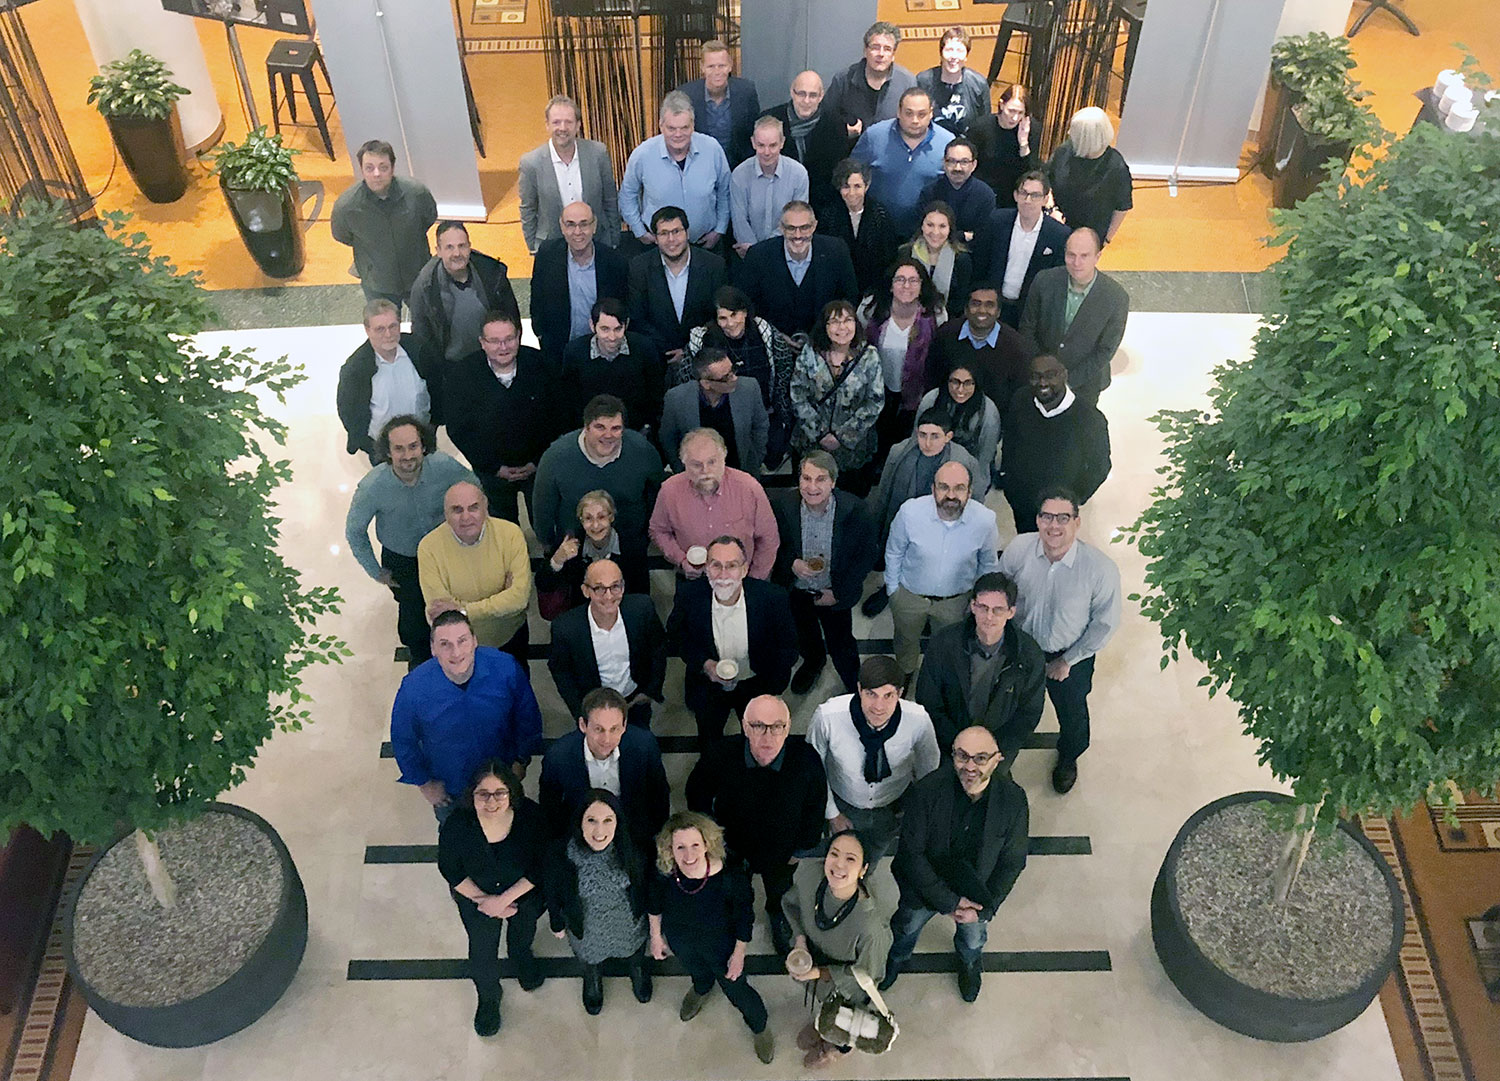 Project participants at the kickoff meeting in January 2019